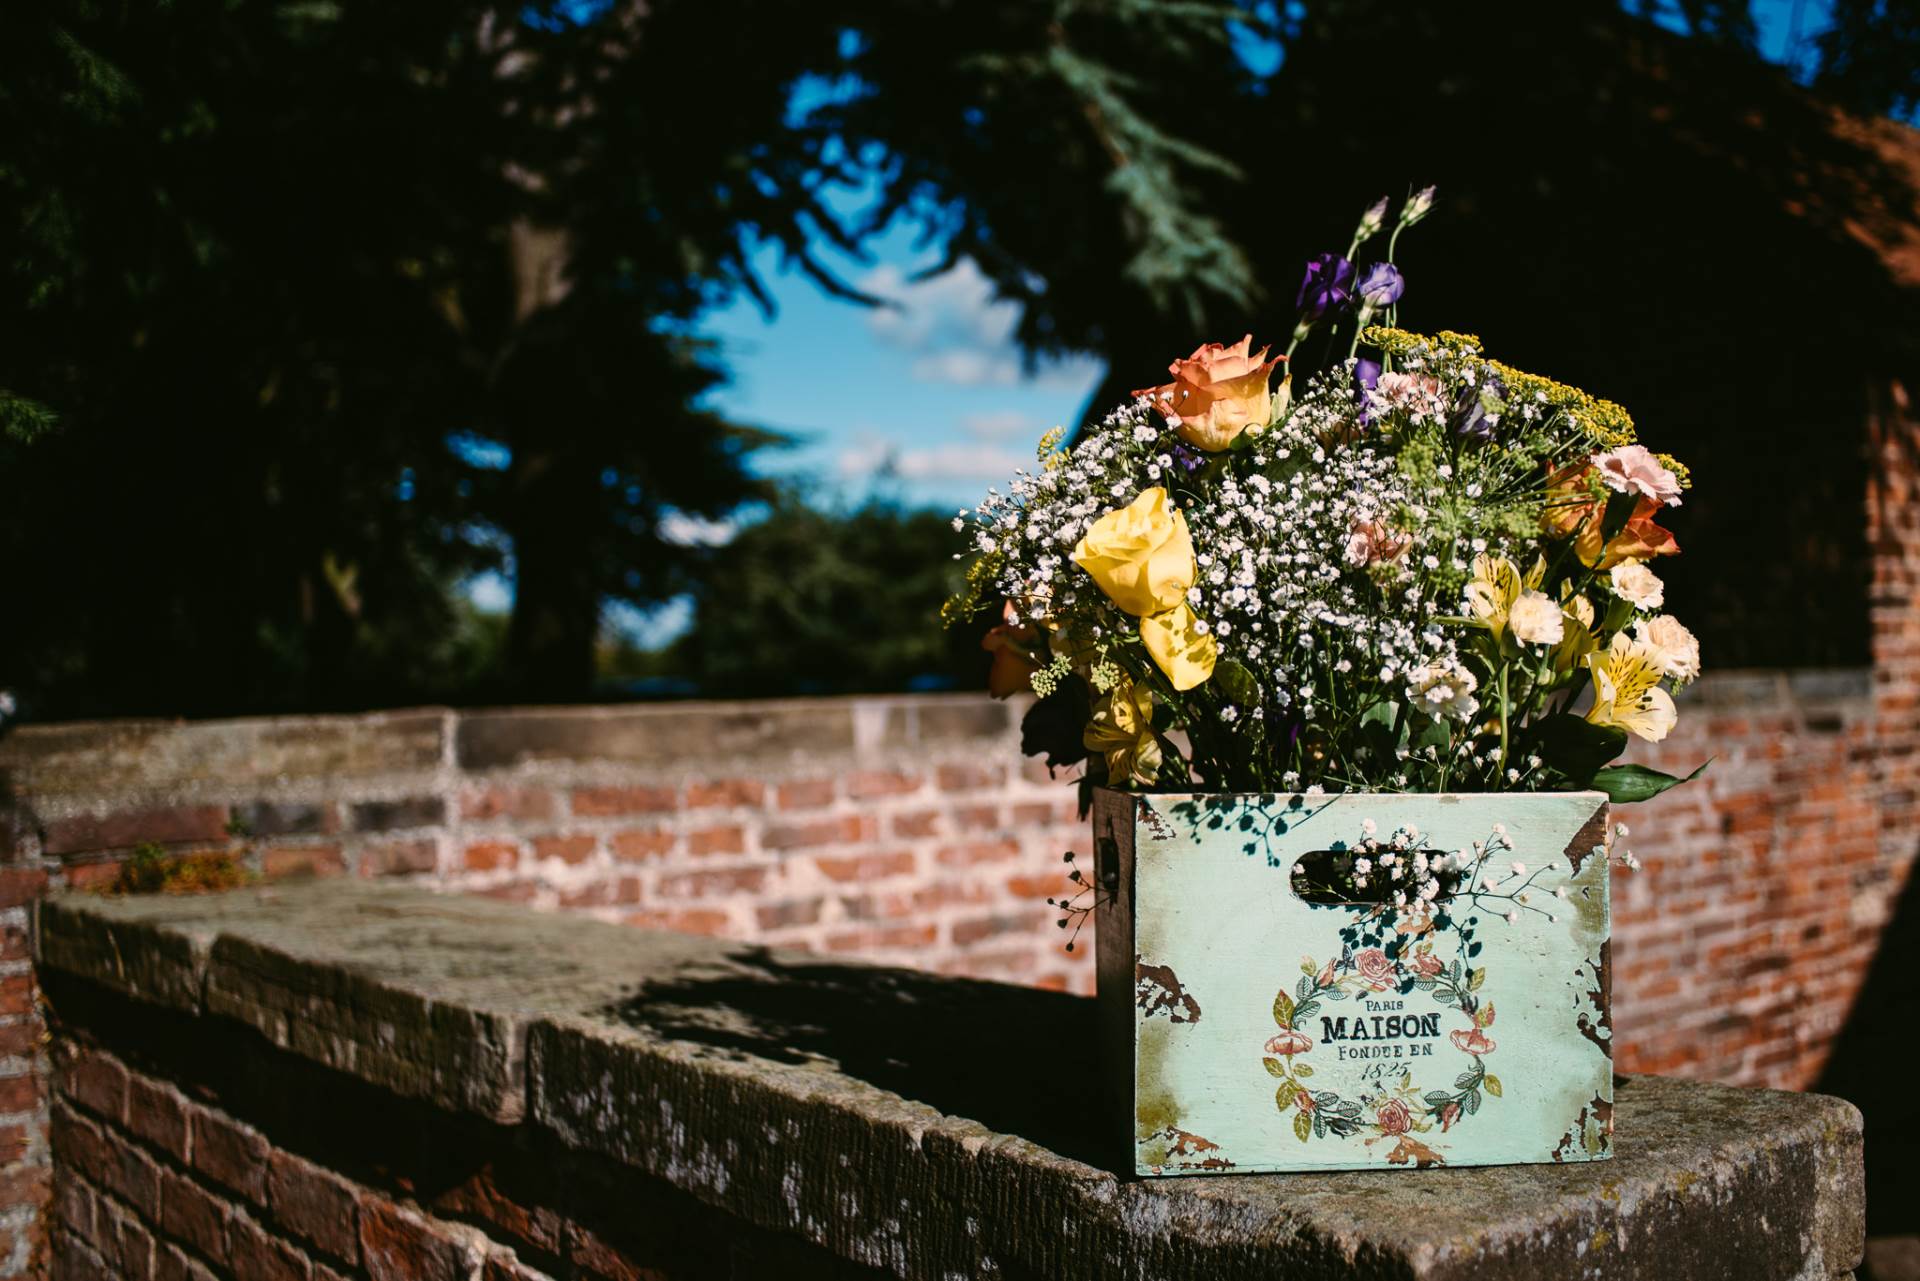 A Vintage Village Hall wedding photographed by Esme Mai Photography and featured on The National Vintage Wedding Fair blog